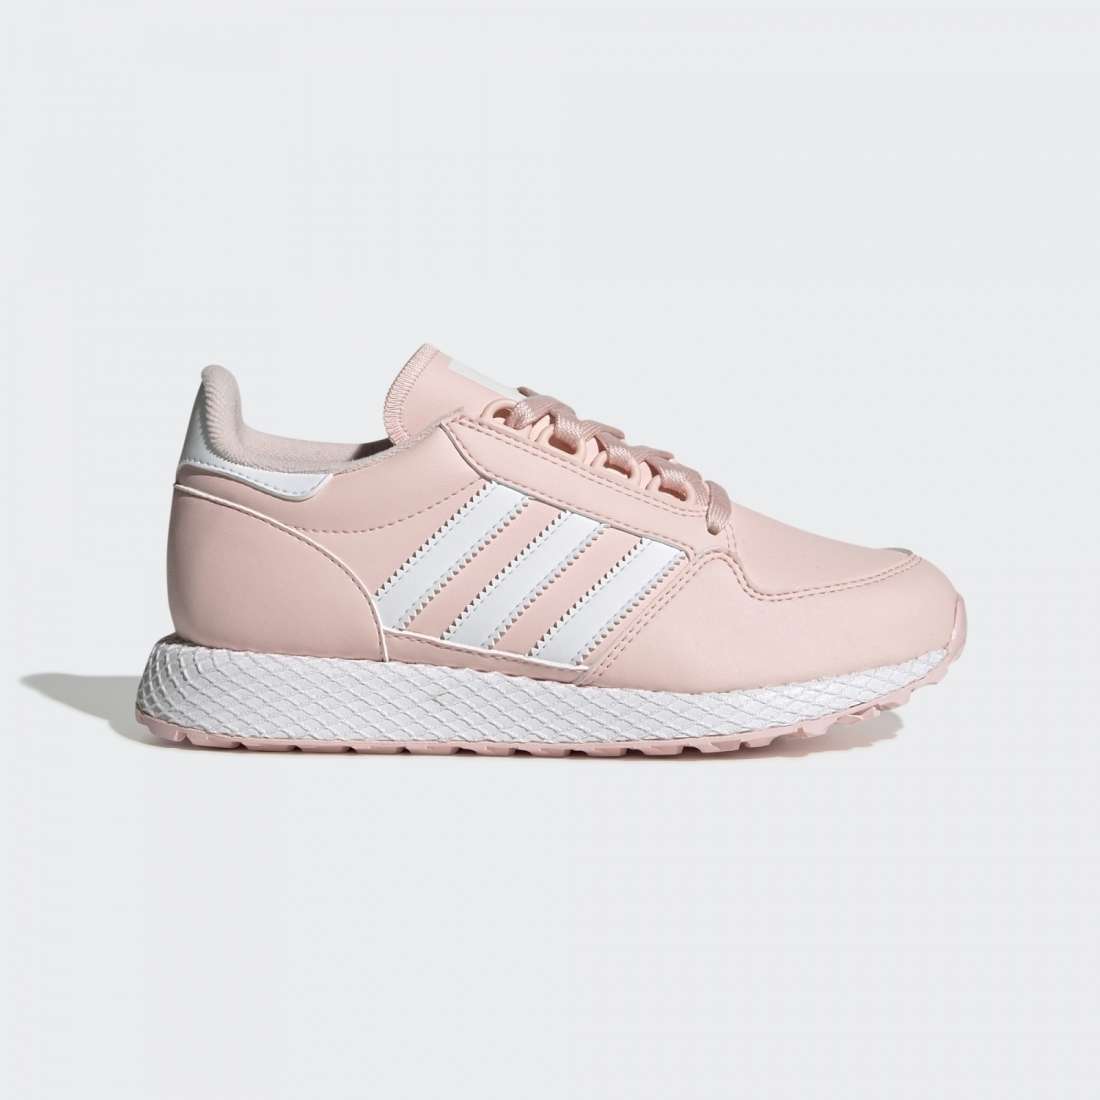 ADIDAS FOREST GROVE J ROSE/WHITE